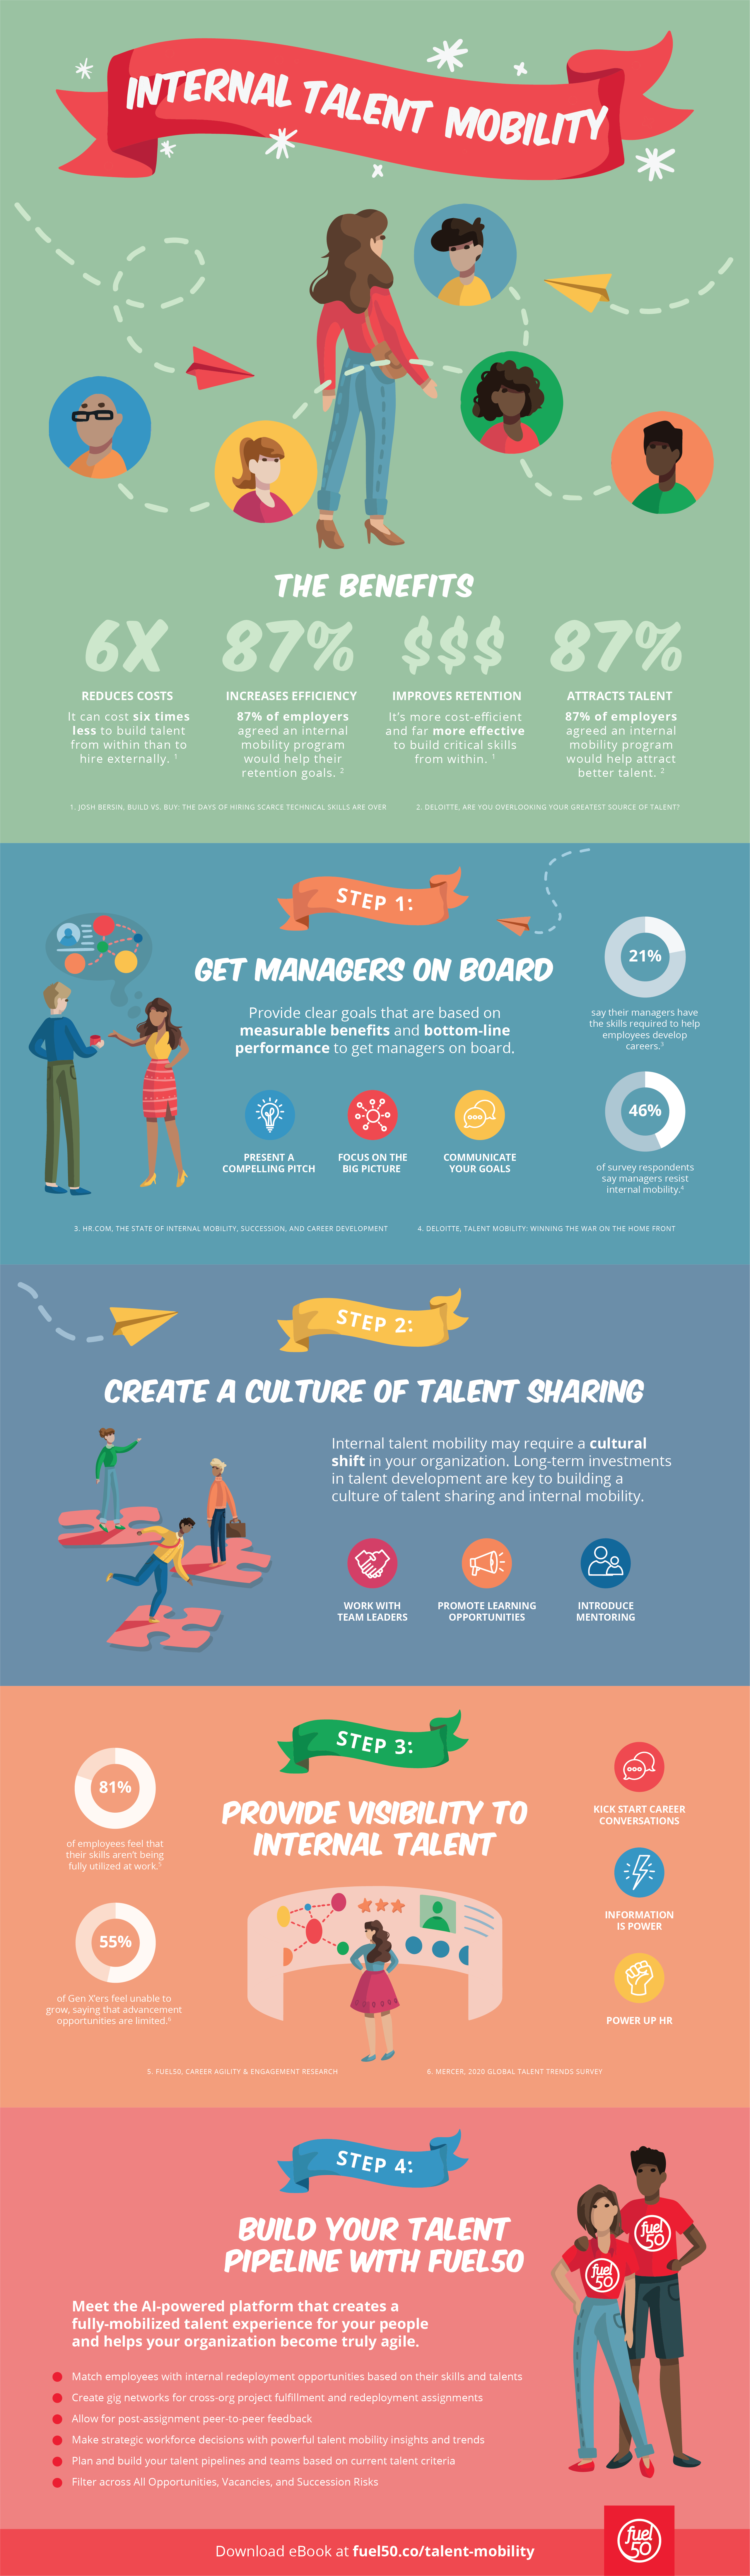 Fuel50 Internal Talent Mobility Infographic